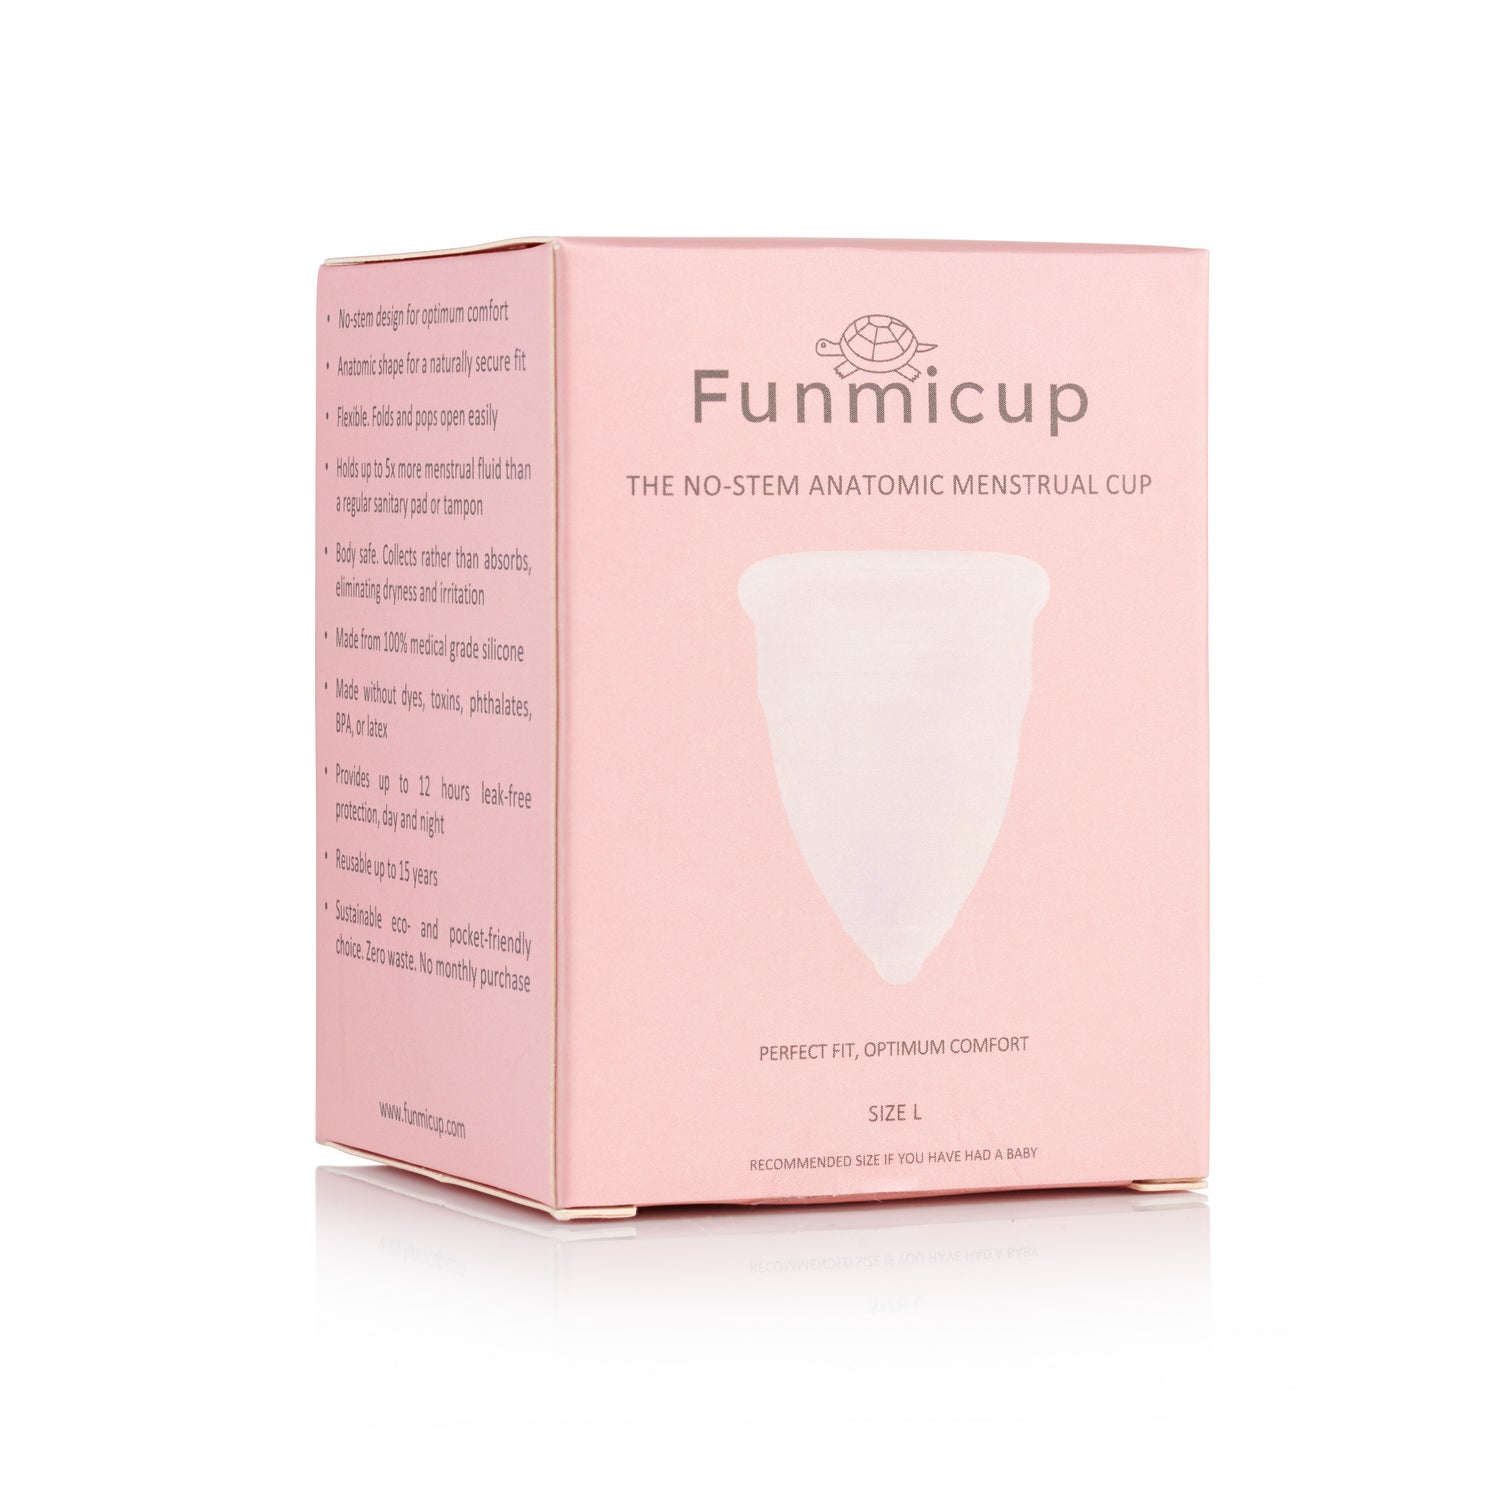 Funmicup No-stem Anatomic Menstrual Cup - Large packaging white background